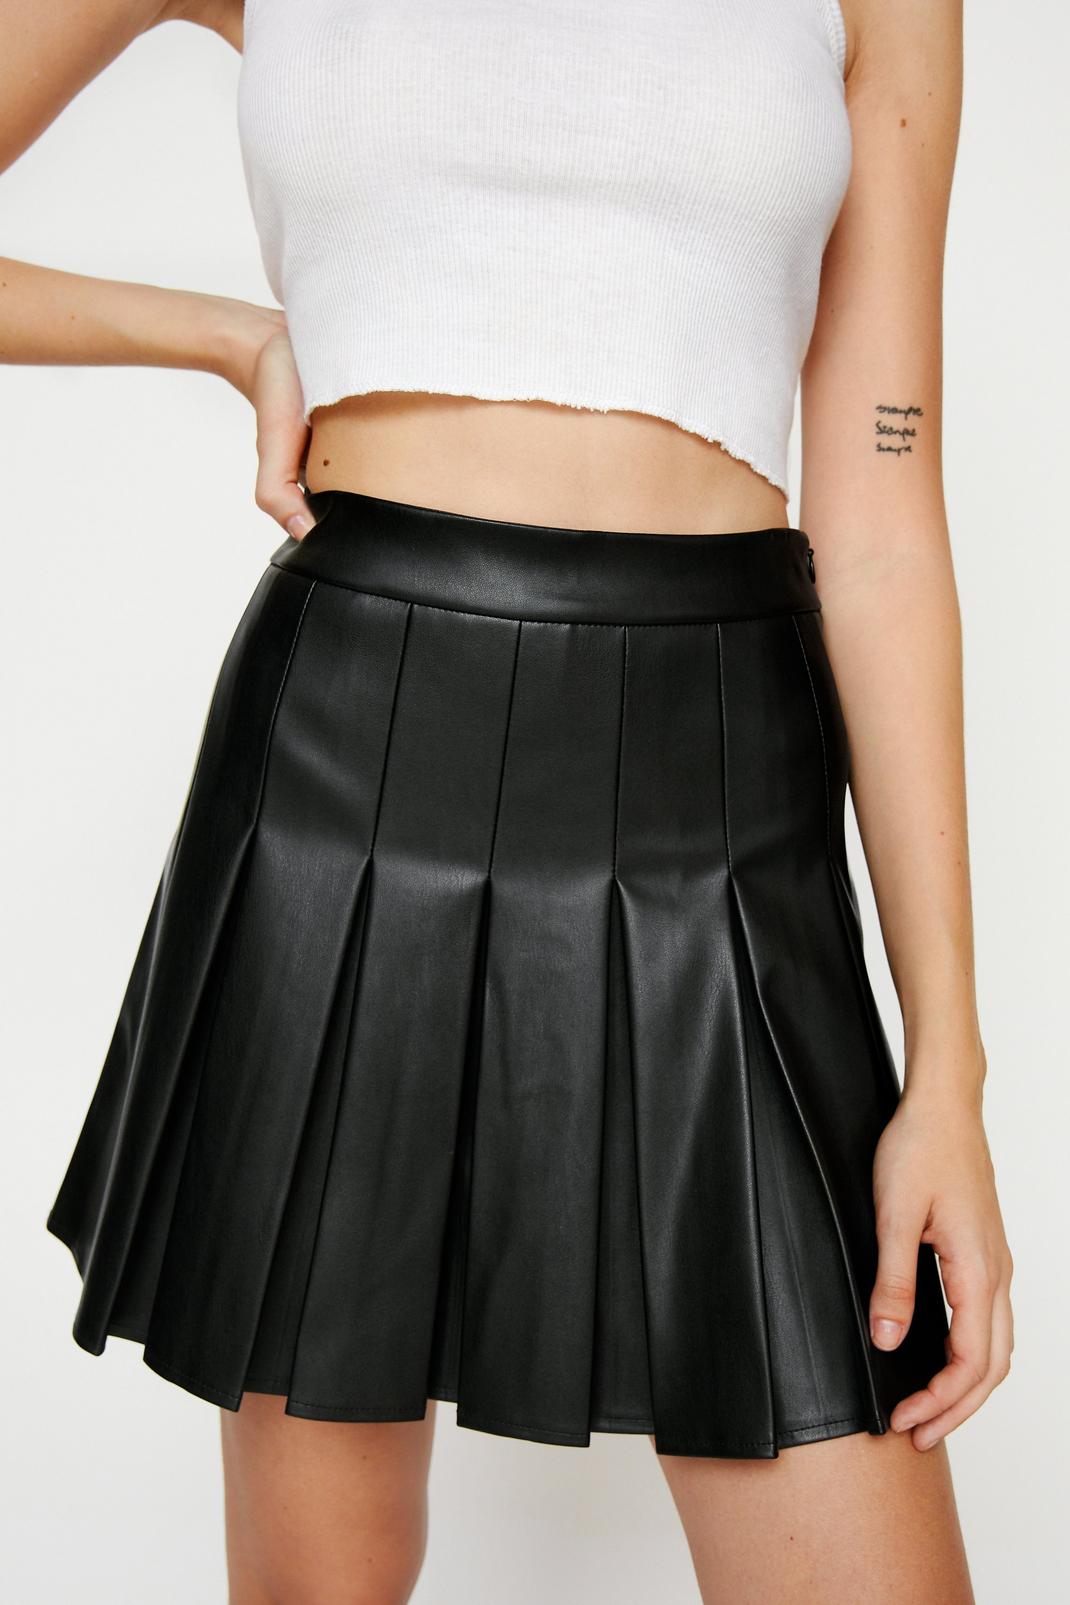 Introduction to Leather Pleated Skirts